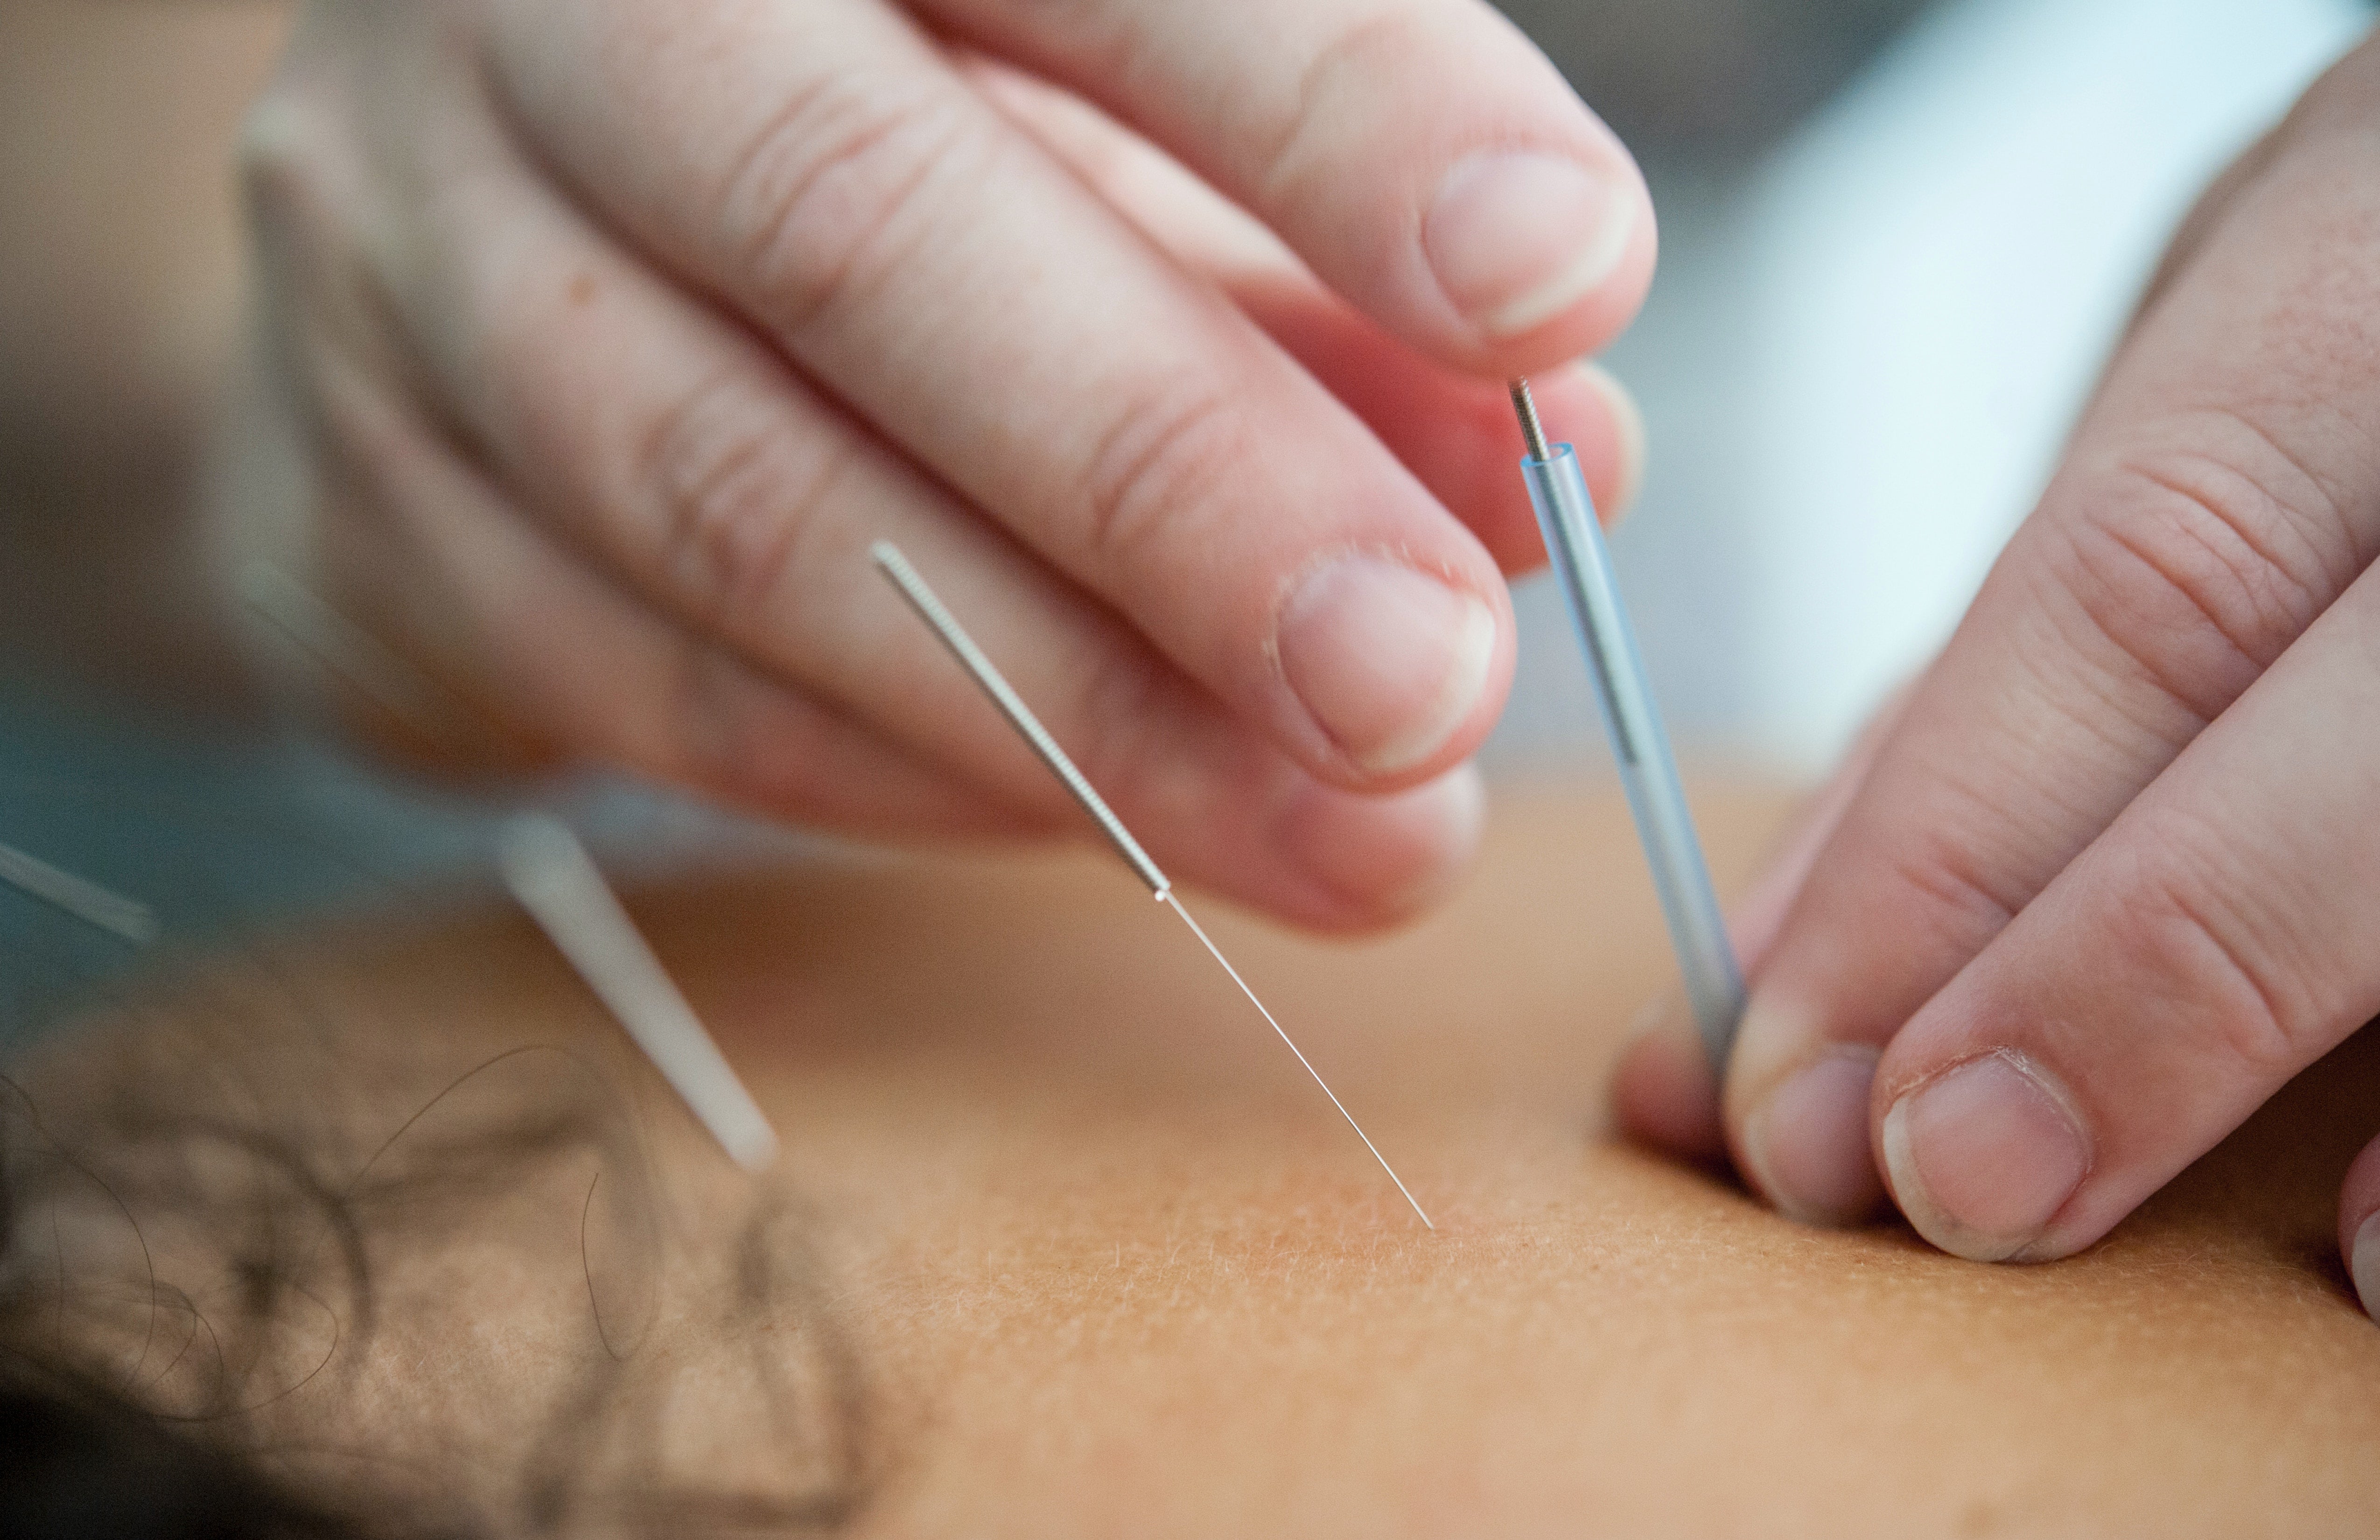 Can acupuncture help my fertility? We asked our CEO to break down the benefits.